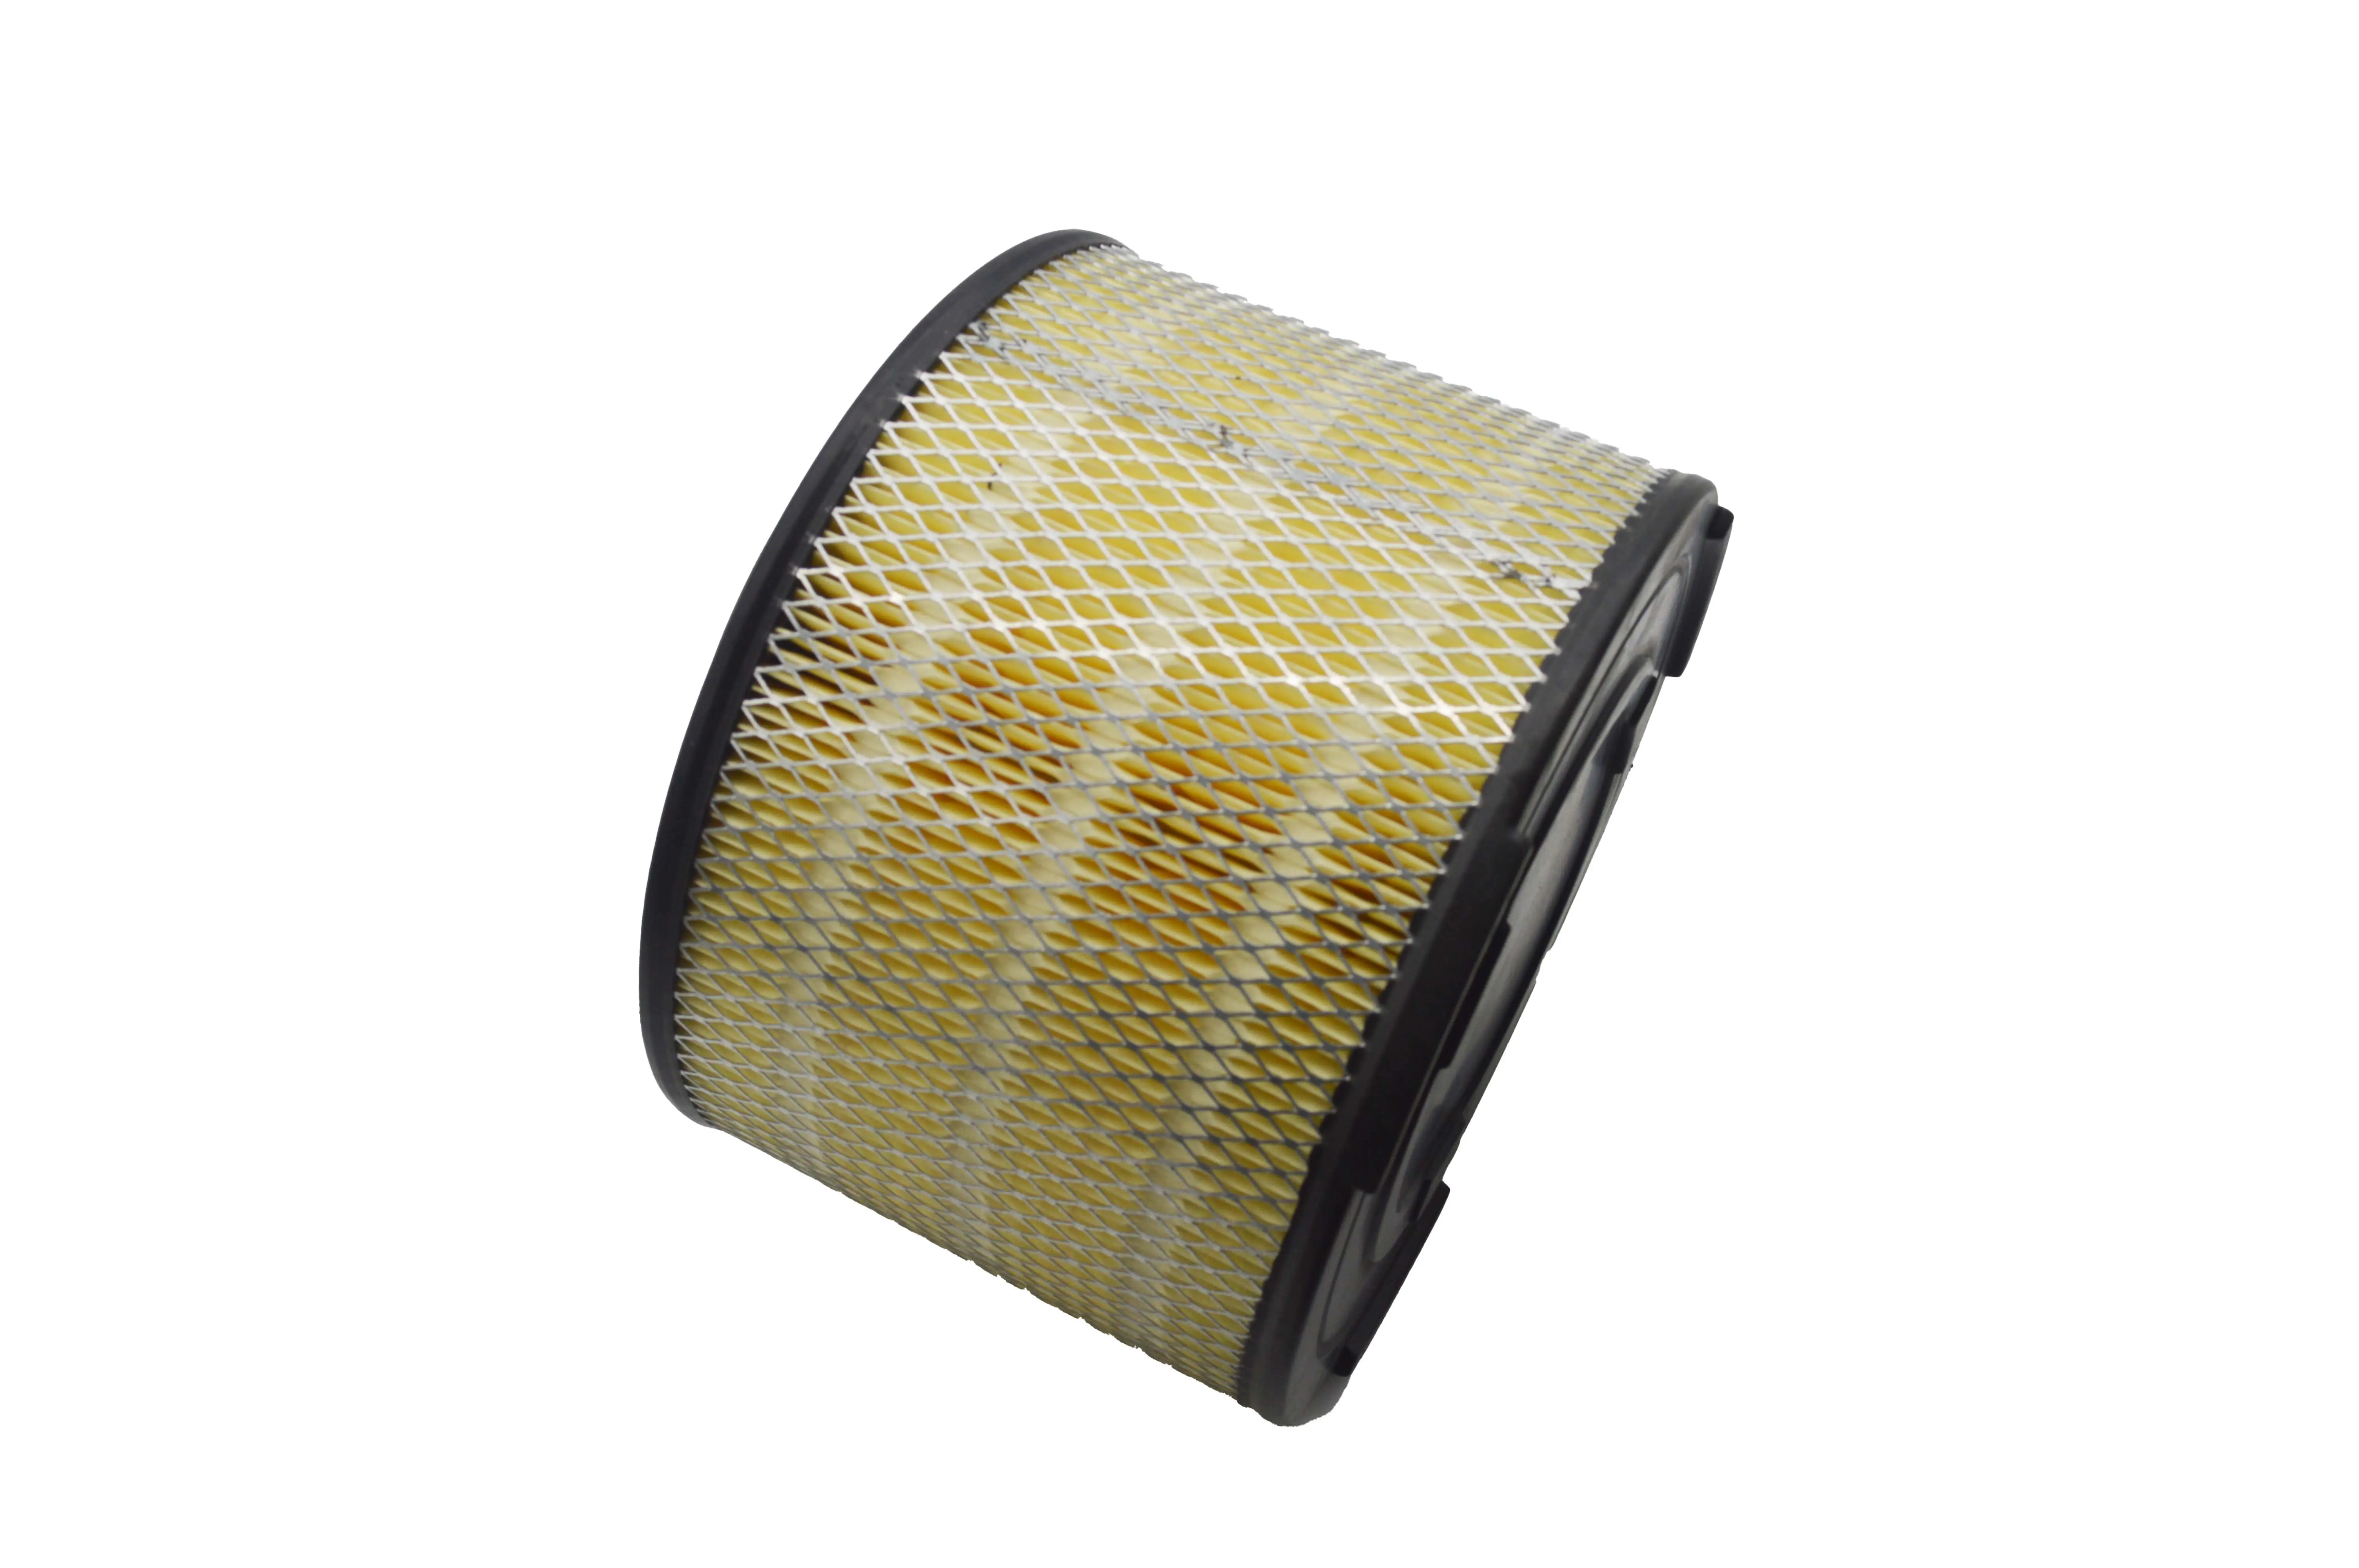 17801-0C010 High quality Wholesale China Factory Car Air Filter 17801-OC010 use TOYOTA HILUX FILTER 17801-OC010